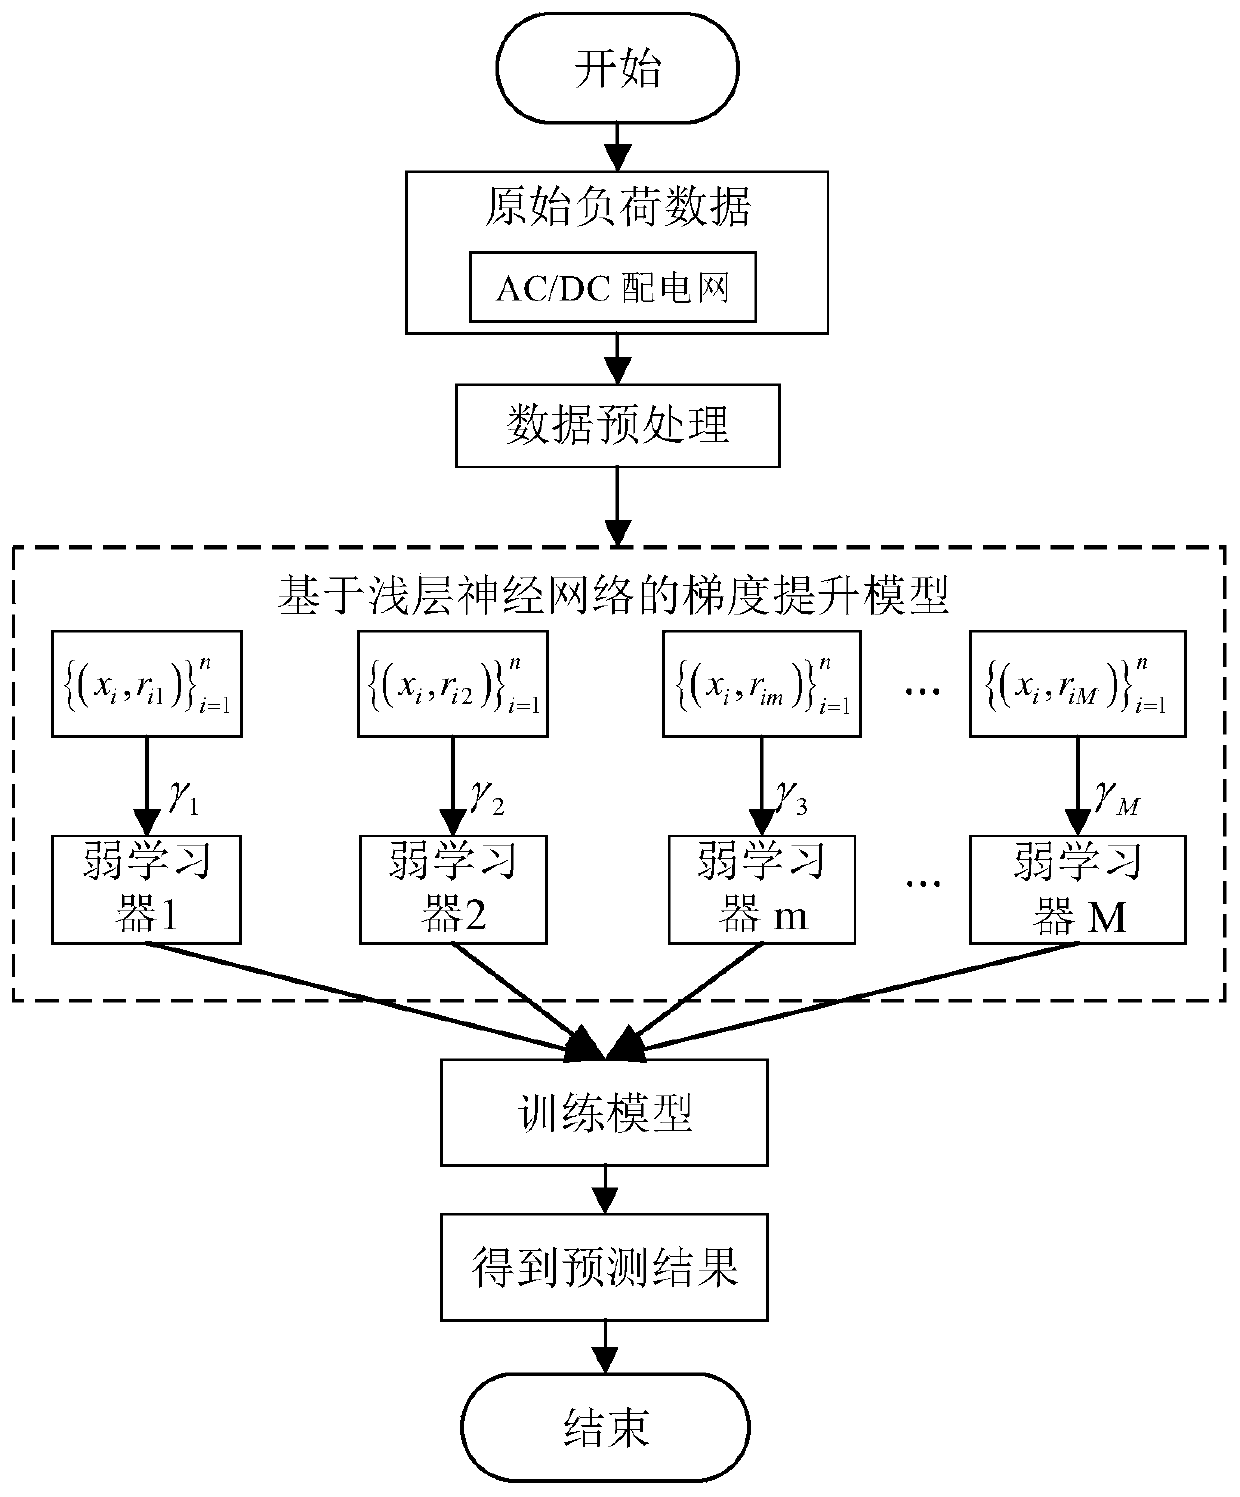 AC-DC power distribution network load prediction method based on ensemble learning